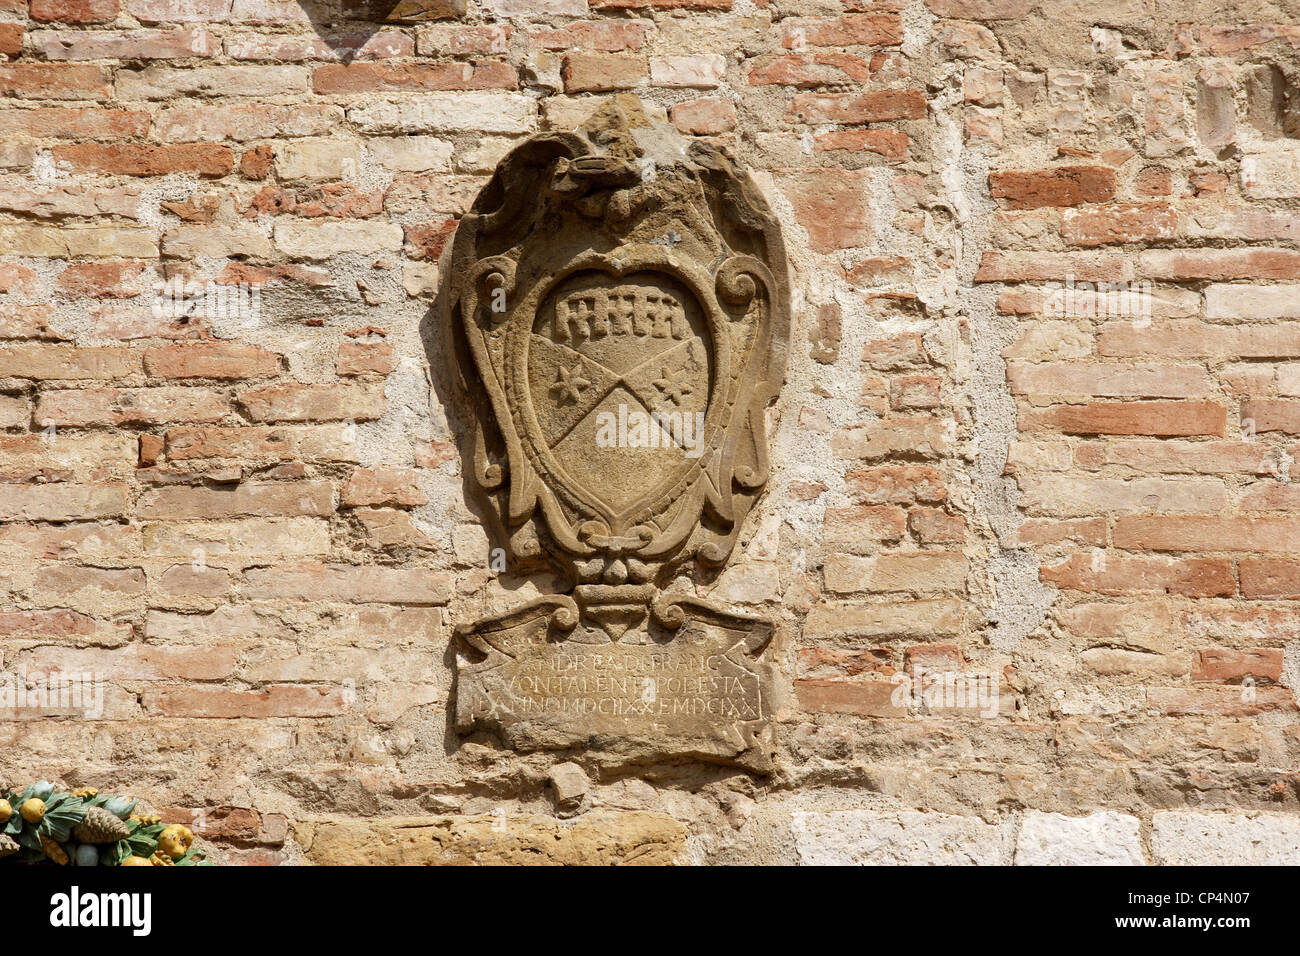 Detail of a coat of arms of the Pretorian Palace or Podesta's Palace. Italy, Tuscany Region, Colle Val d'Elsa (Si). Stock Photo